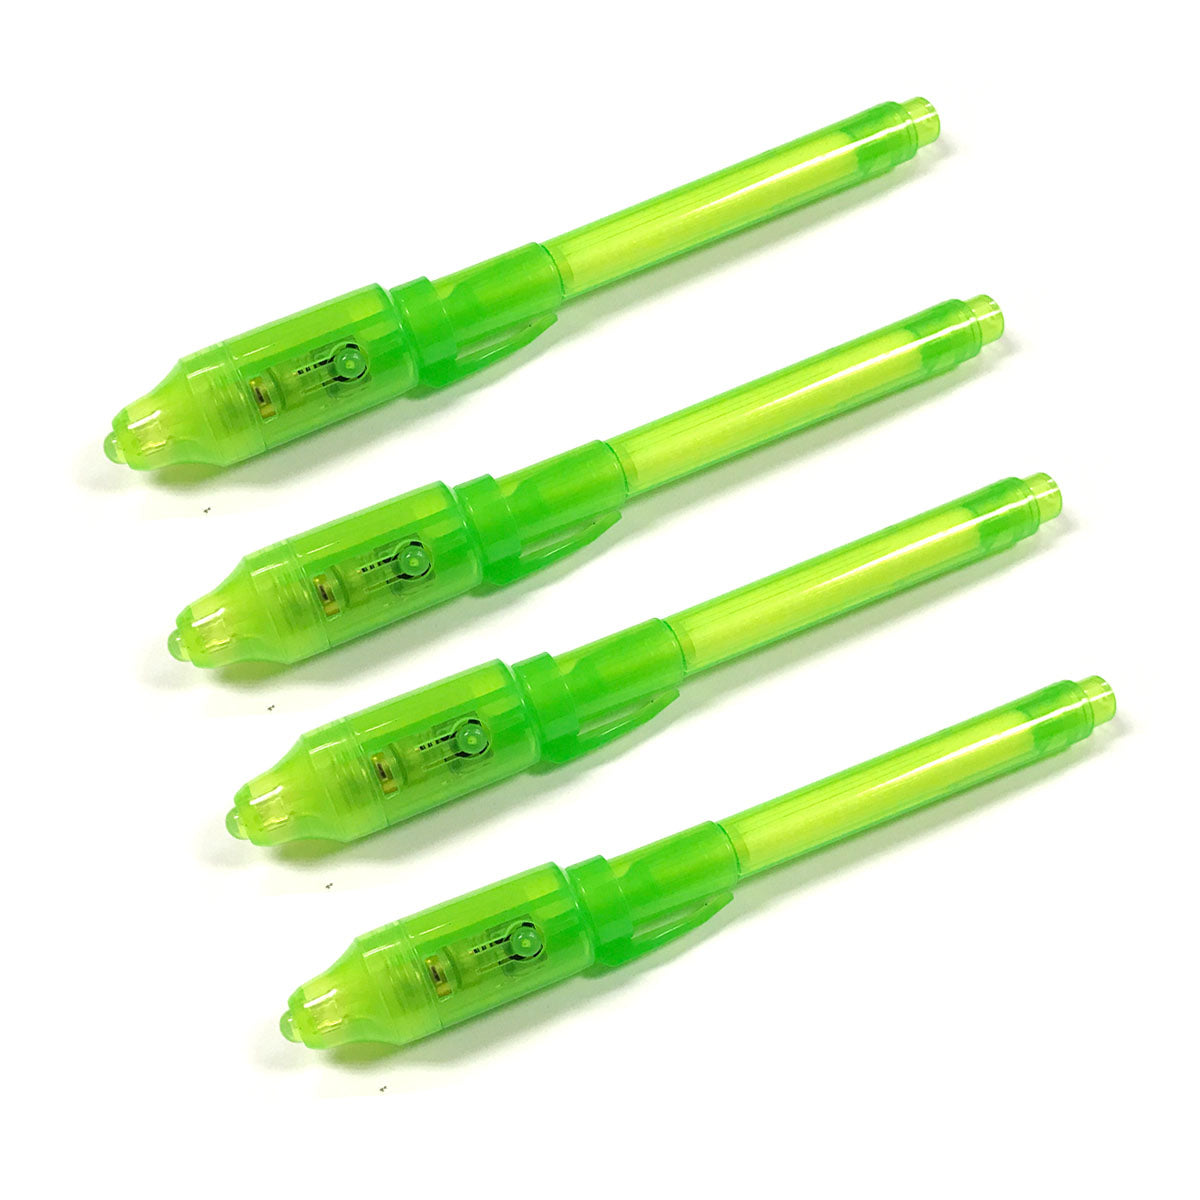 Wrapables Invisible Ink Pen with UV Light, Spy Pen for Writing Secret Messages (Set of 4) Set of 4, Green